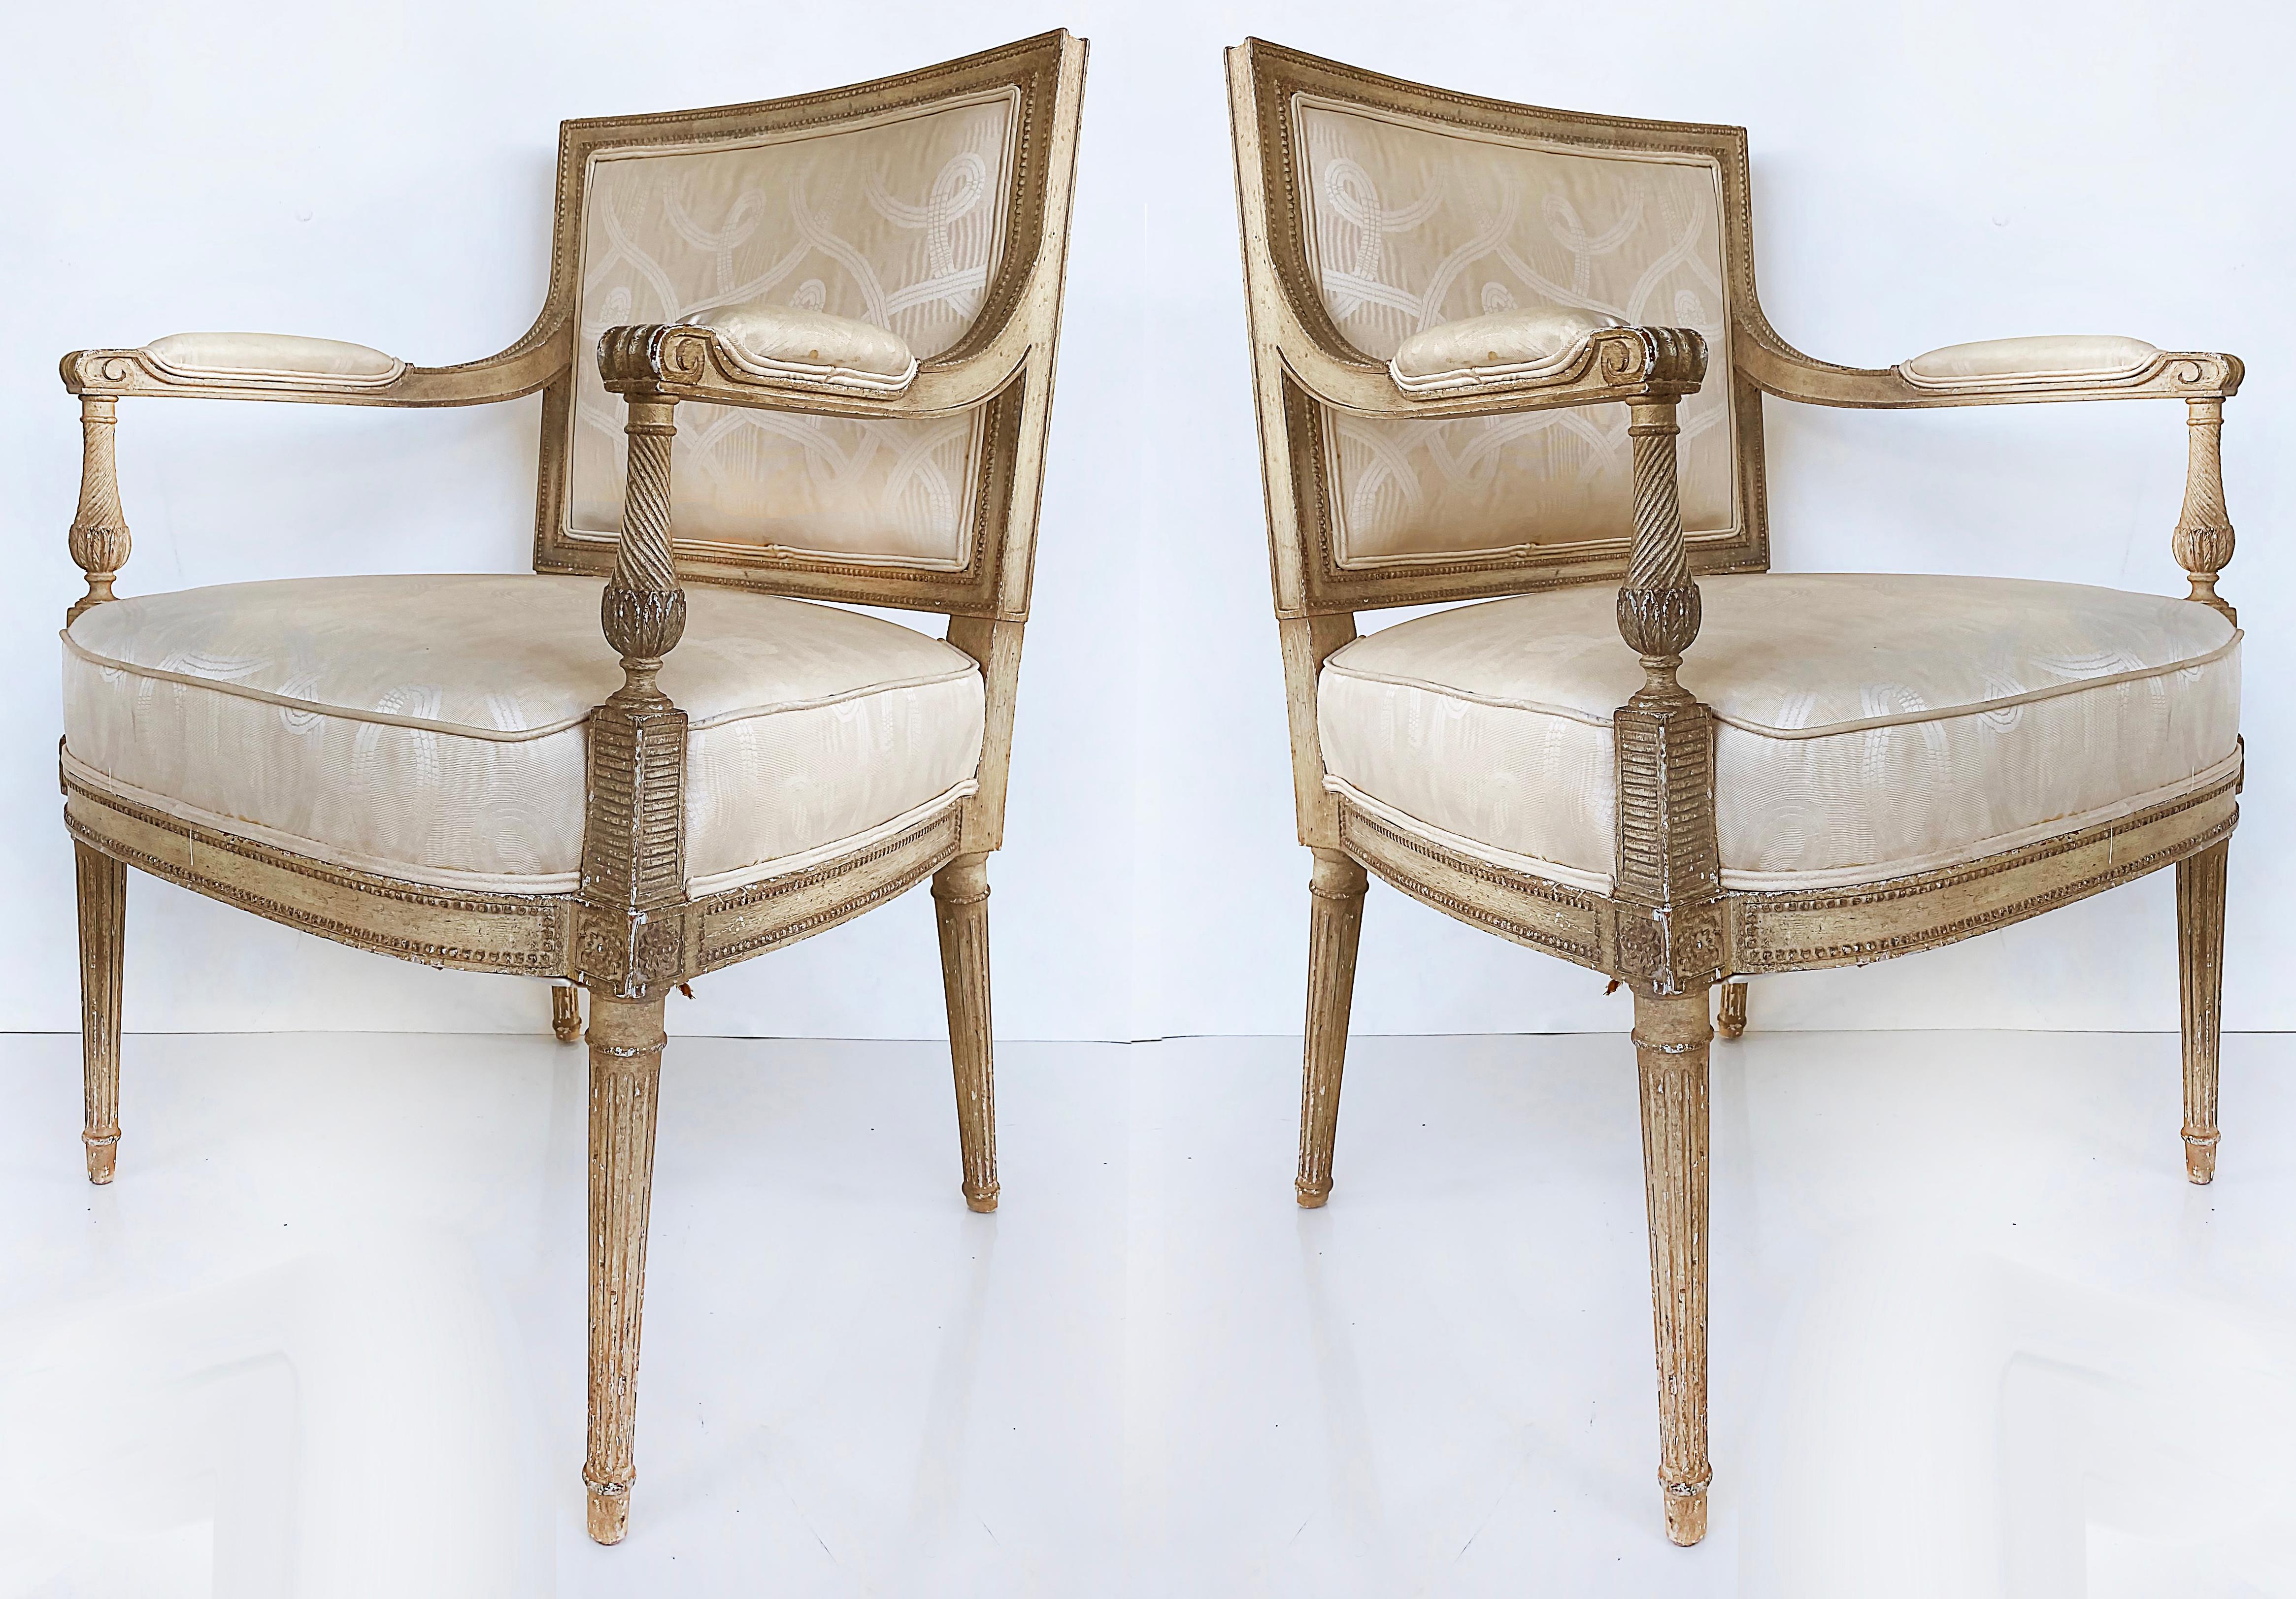 European French Louis XVI Style Painted Fauteuil Armchairs, Late 19th Century -Early 20th For Sale